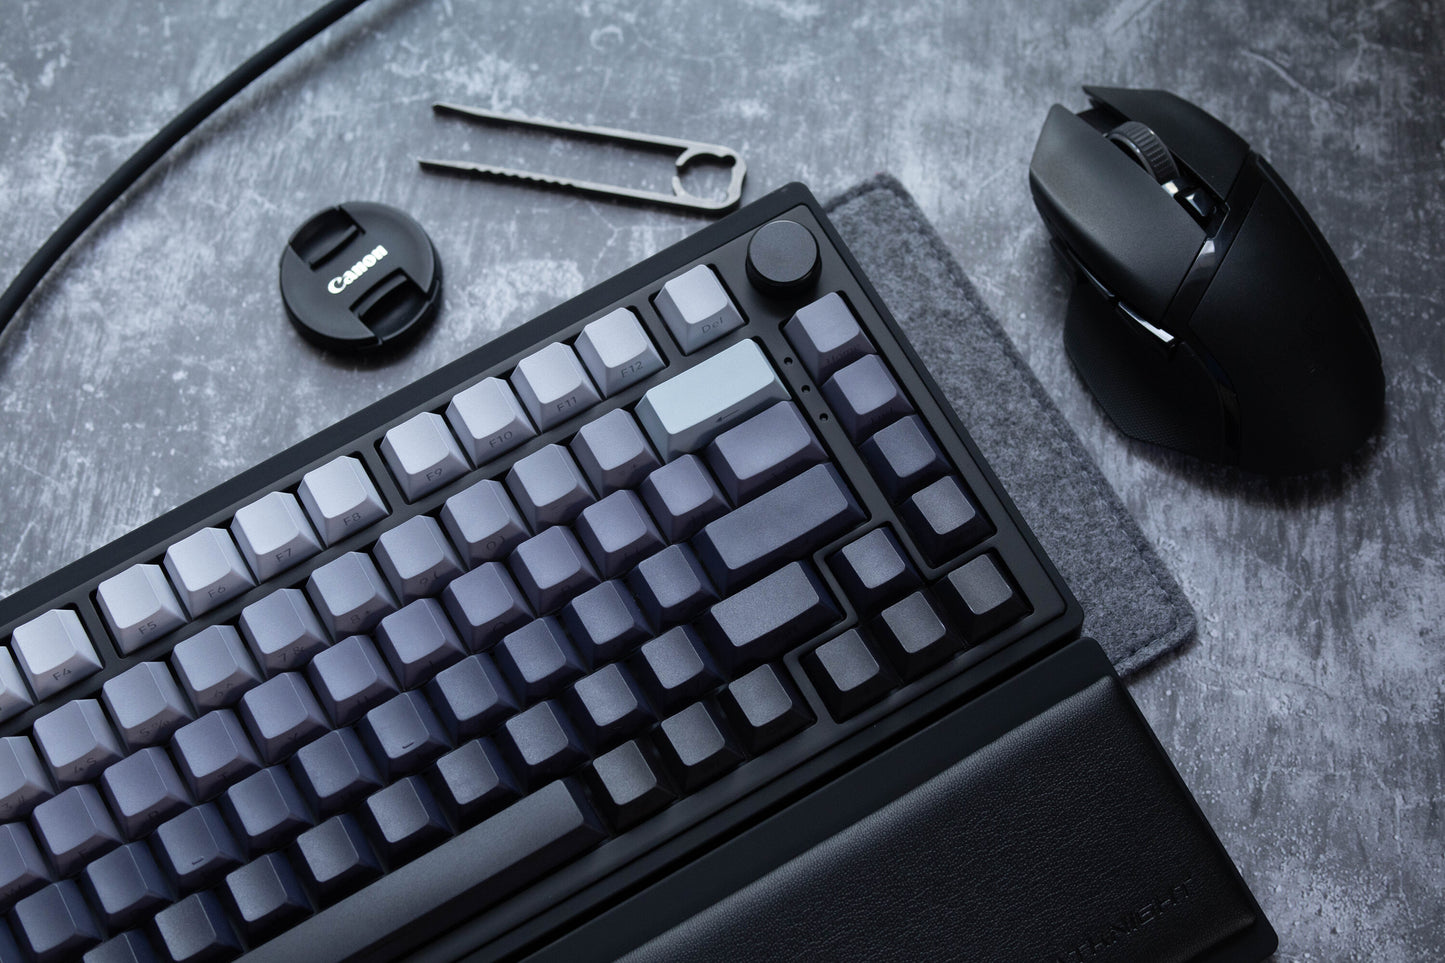 [In Stock] BK75 Tri-Mode Wireless Hot-Swappable RGB Pre-Built Mechanical Gaming Keyboard